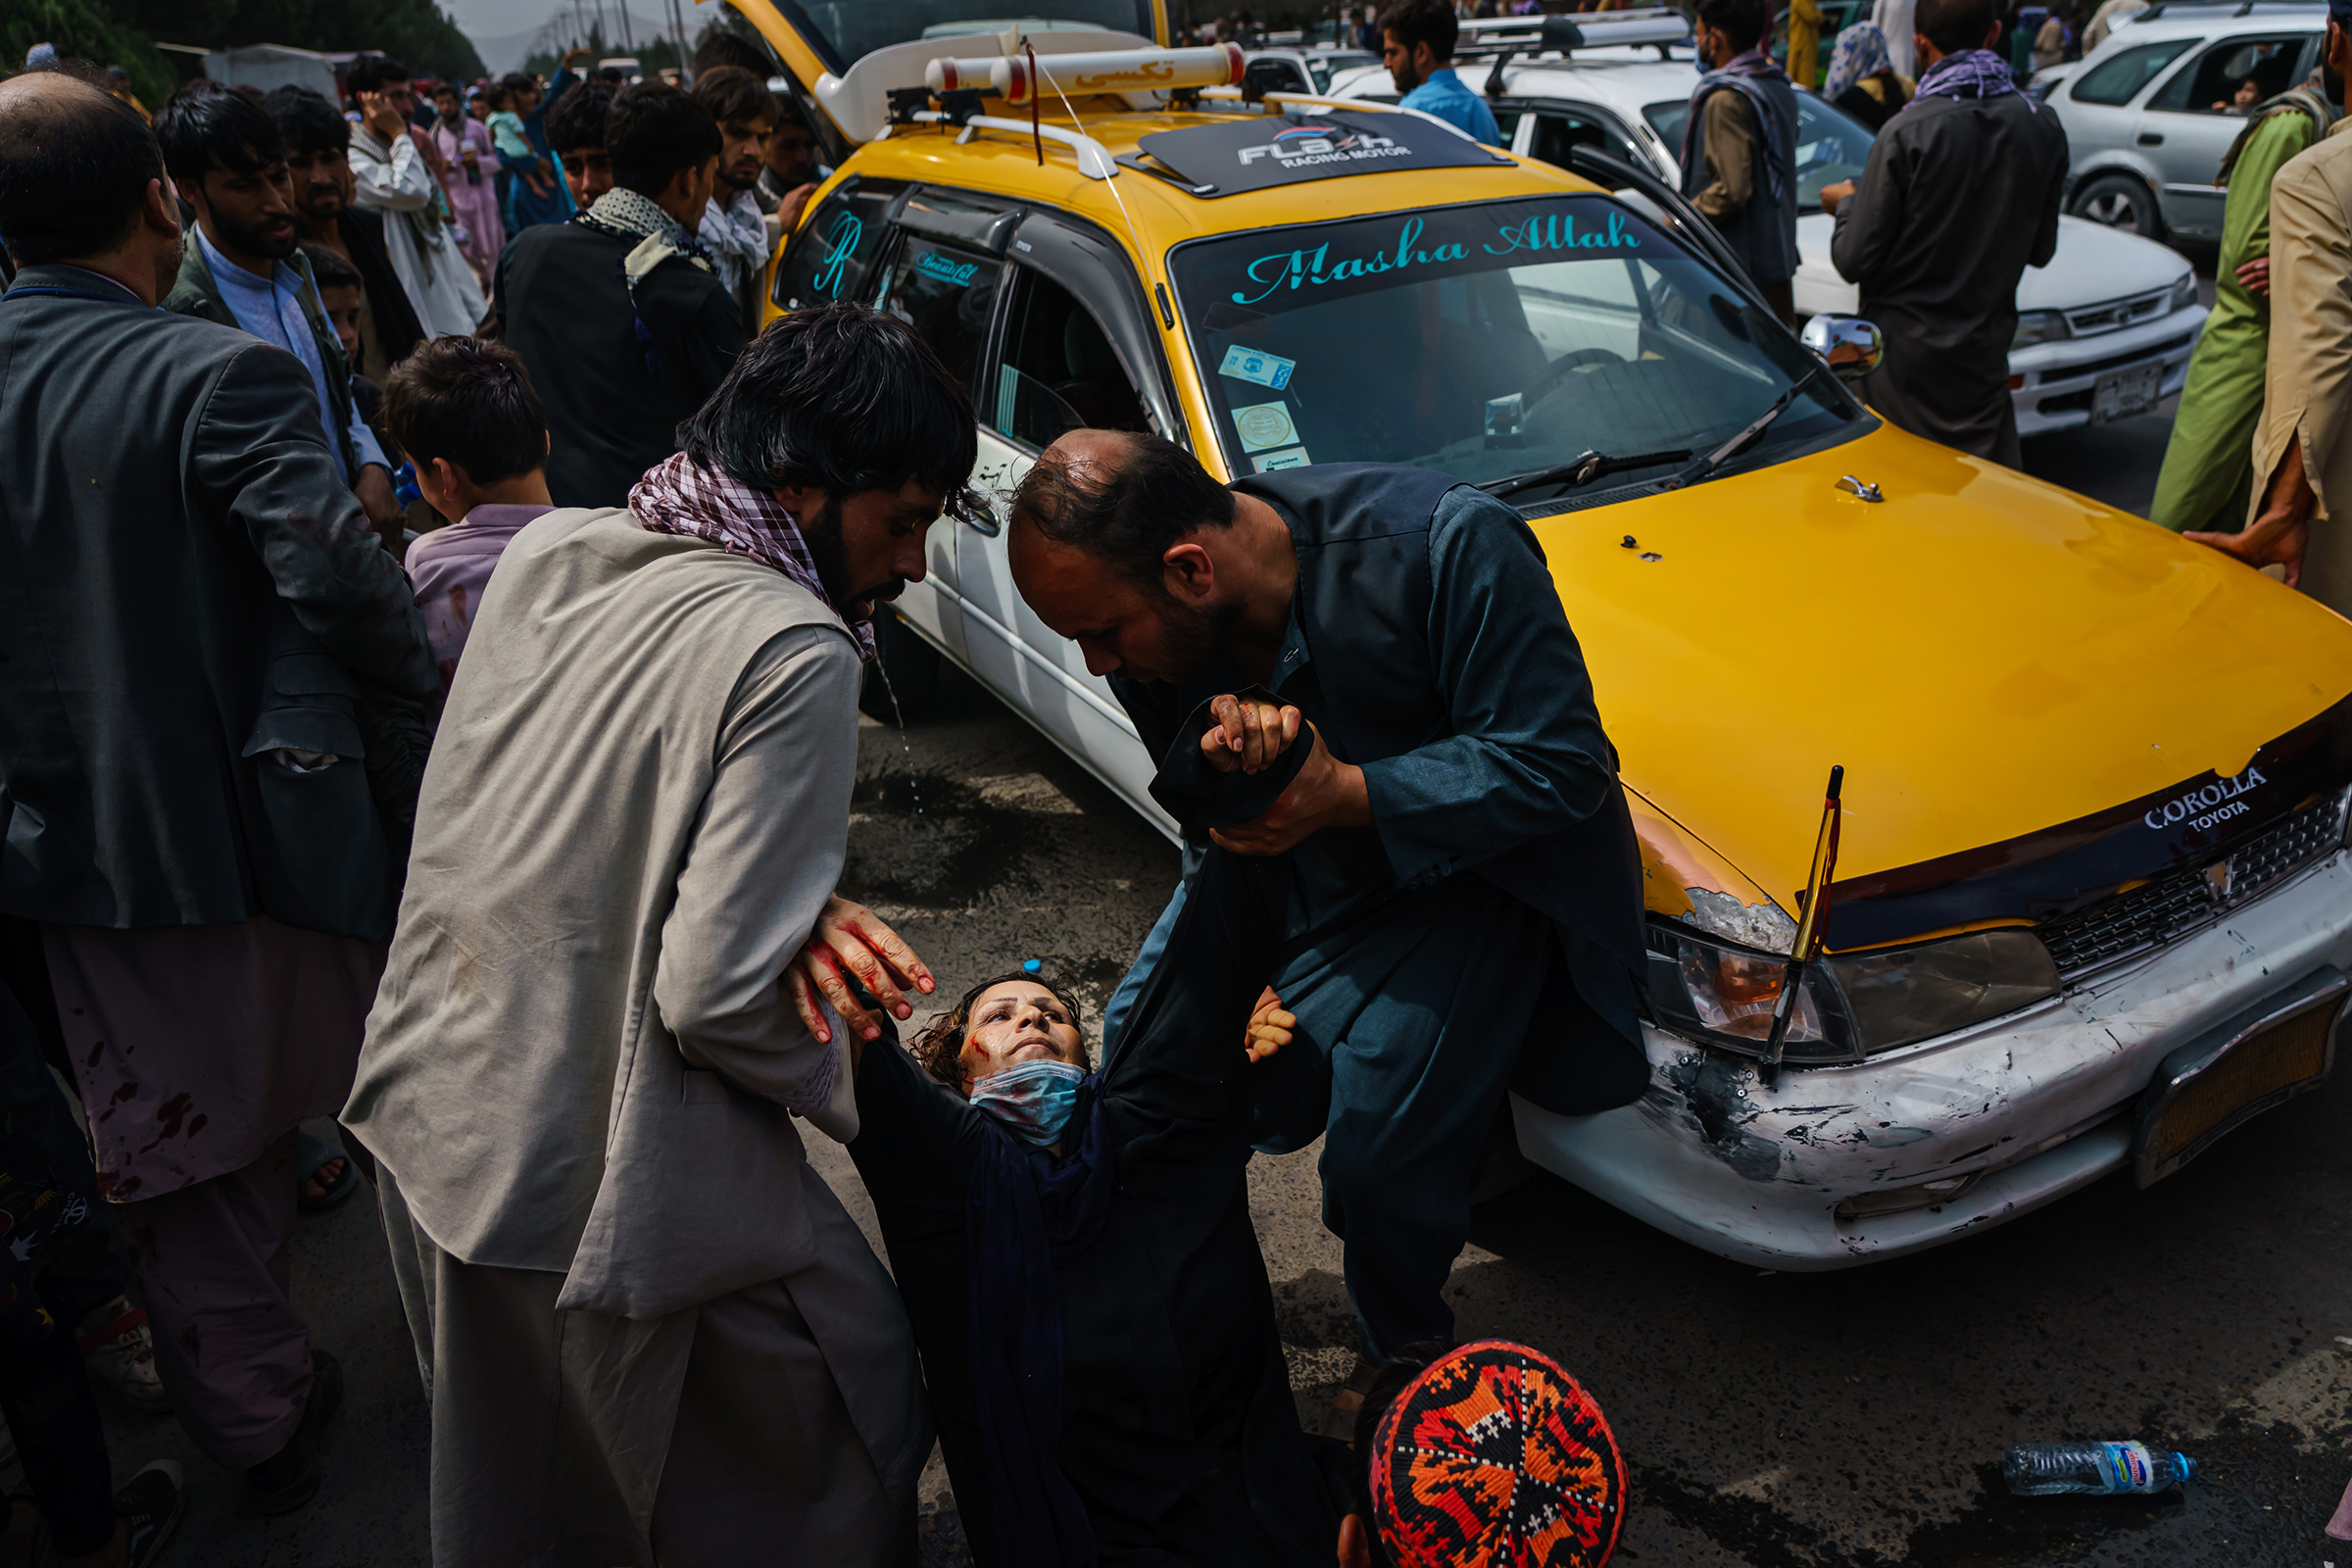 Men try to help a wounded woman and her child, who was also injured, after Taliban fighters use gunfire, whips, sticks and sharp objects to maintain control over a crowd of thousands waiting outside the airport in Kabul on Aug. 17. (Marcus Yam—Los Angeles Times/Getty Images)